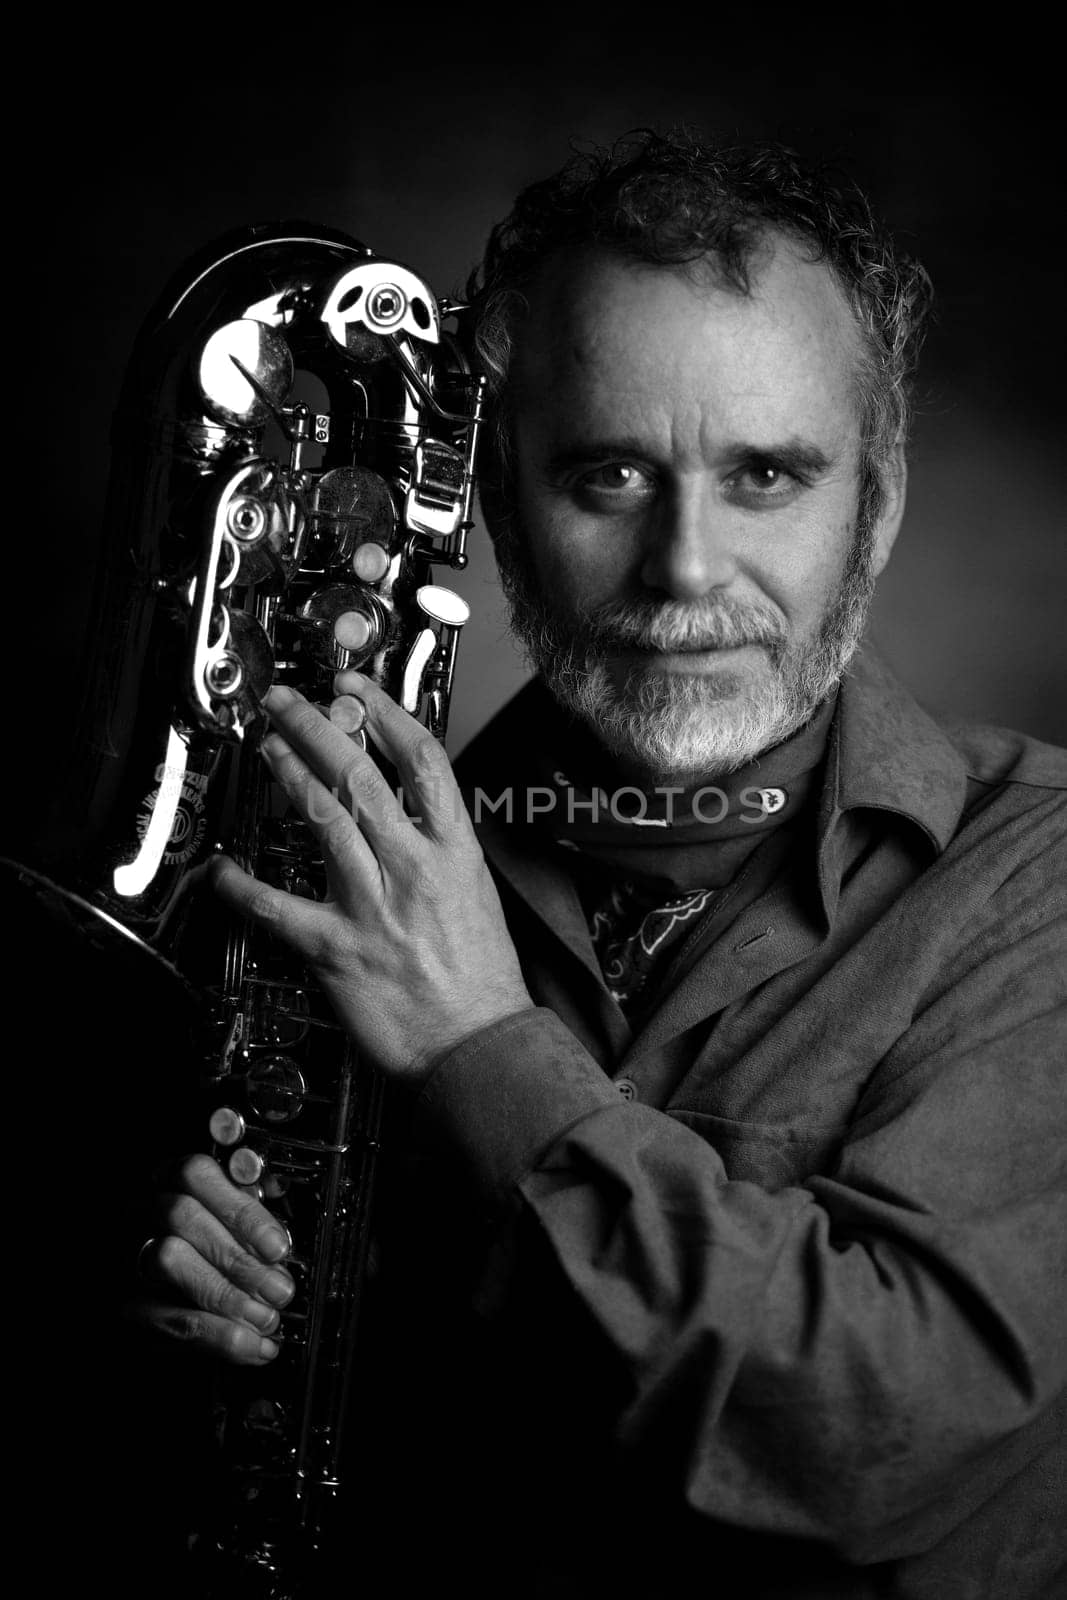 shot of a male musician, saxophonist, holding a saxophone alto jazz musical instrument and thinking, isolated on a dark background by Costin